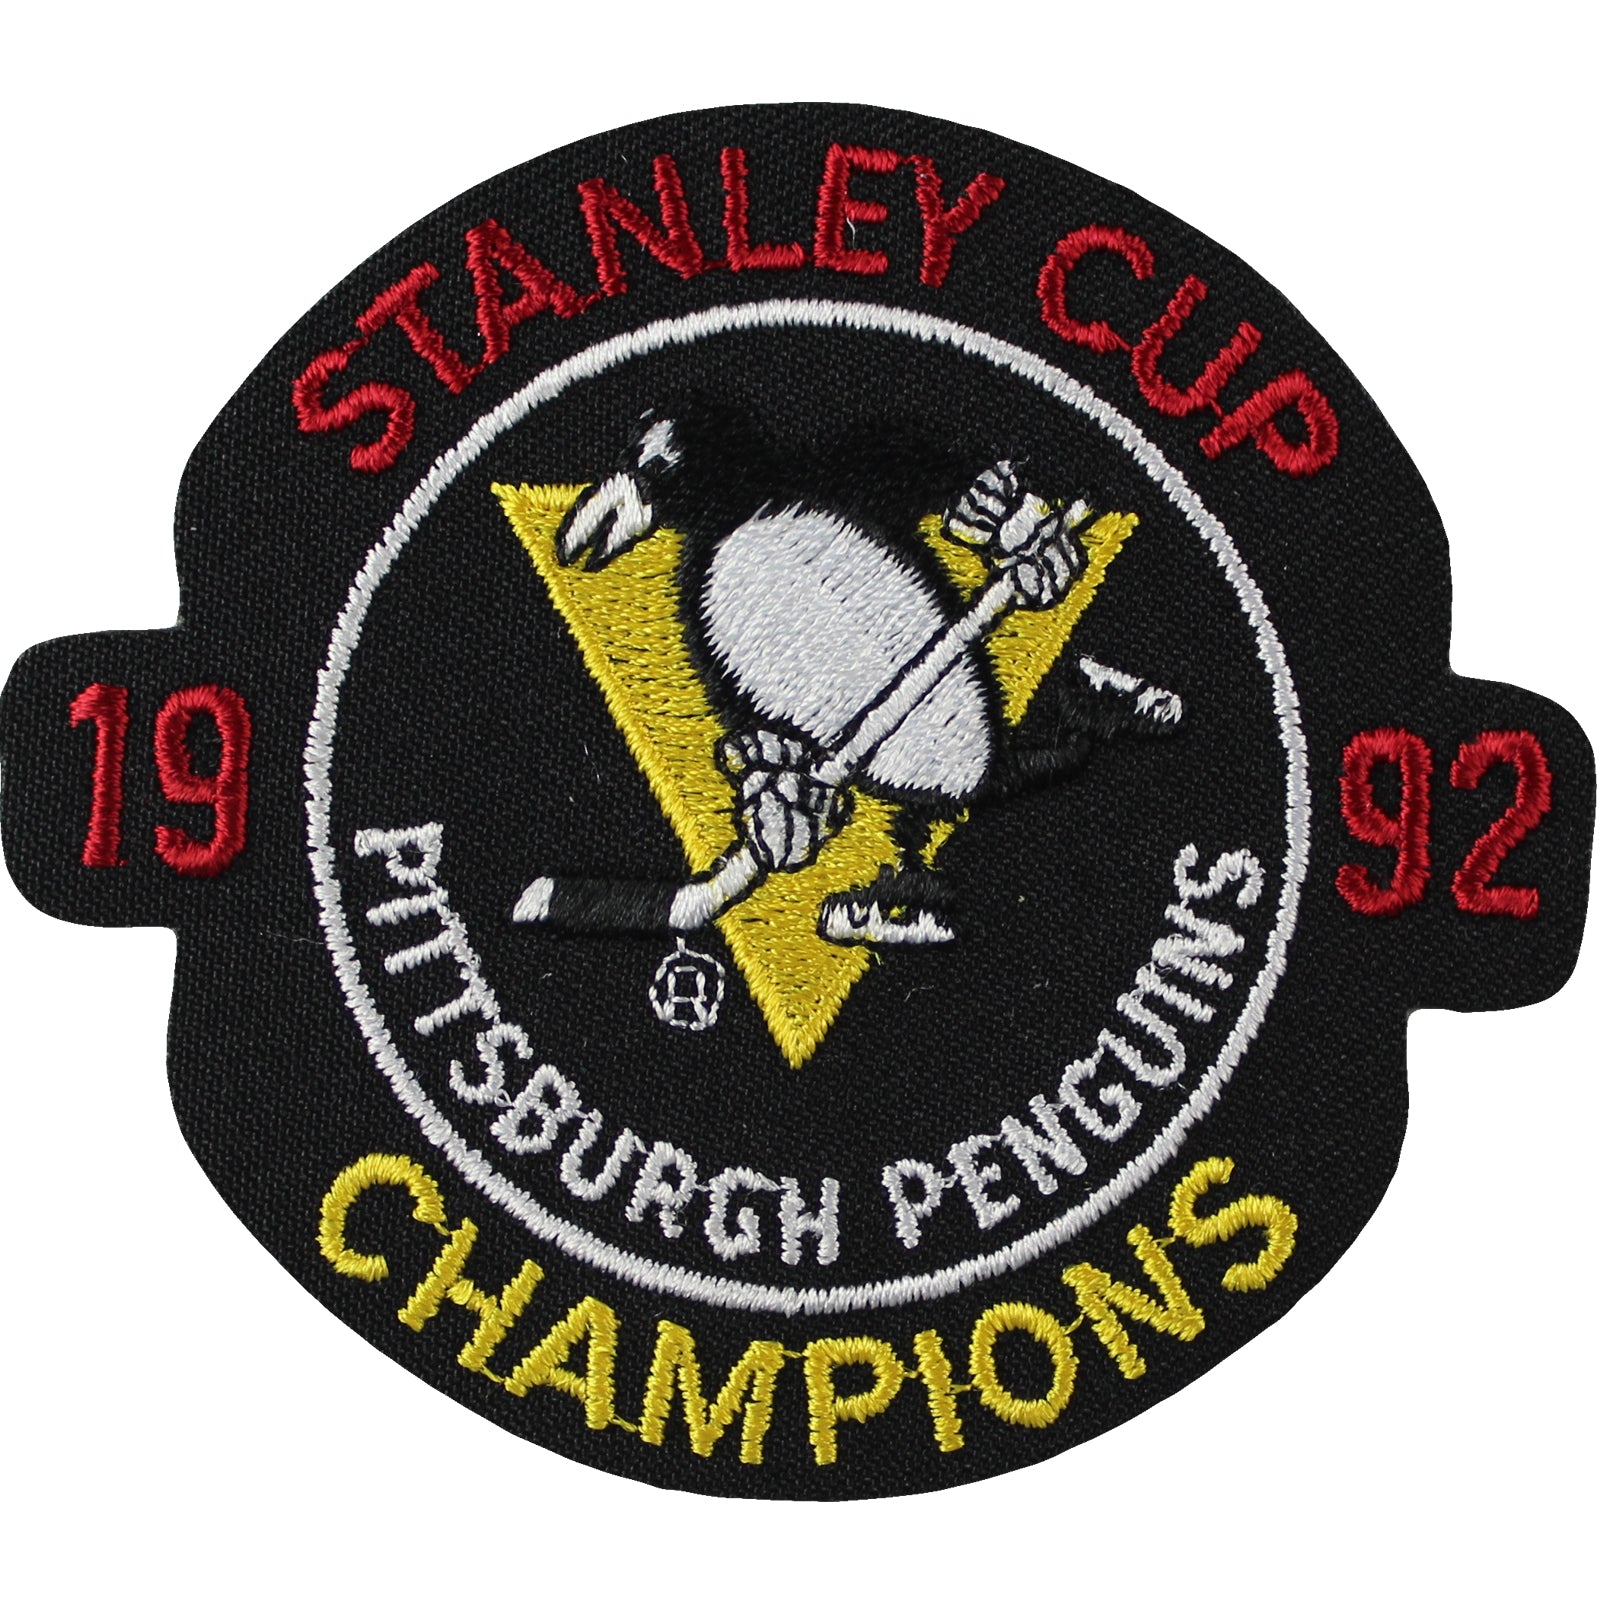 1992 Stanley Cup Finals Patch –